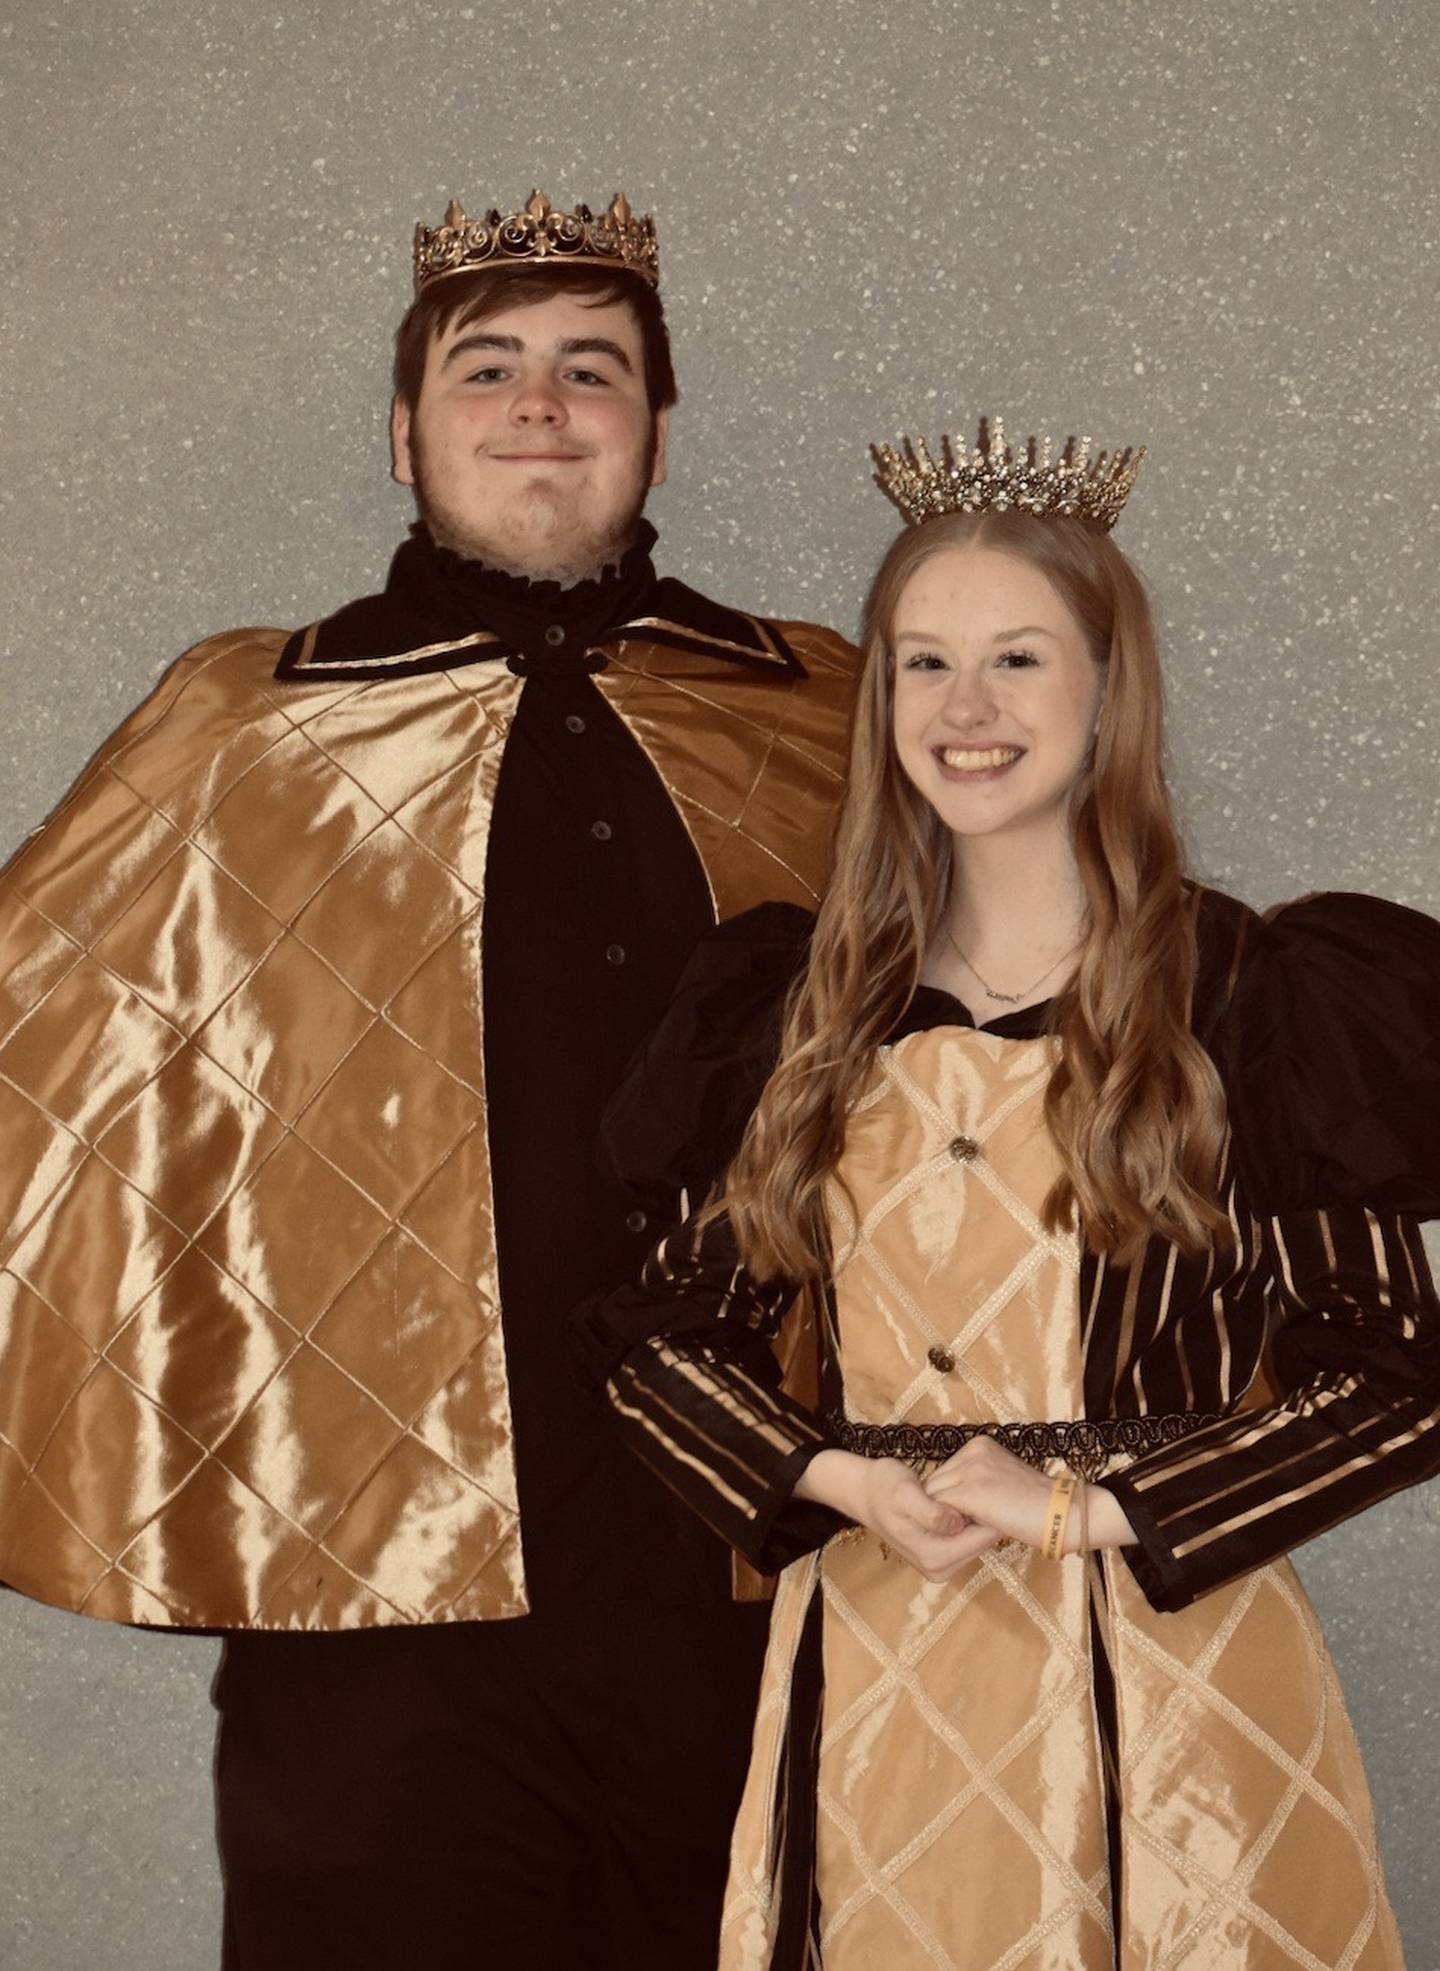 The Coal City High School Madrigal choir is led by seniors CollinDames and Brecken Johnson, who were selected by their peers to serve as Madrigal king and queen for the 2022 season. The Madrigals will host their annual holiday performances in the Coal City Performing Arts Center, Dec. 9-11.